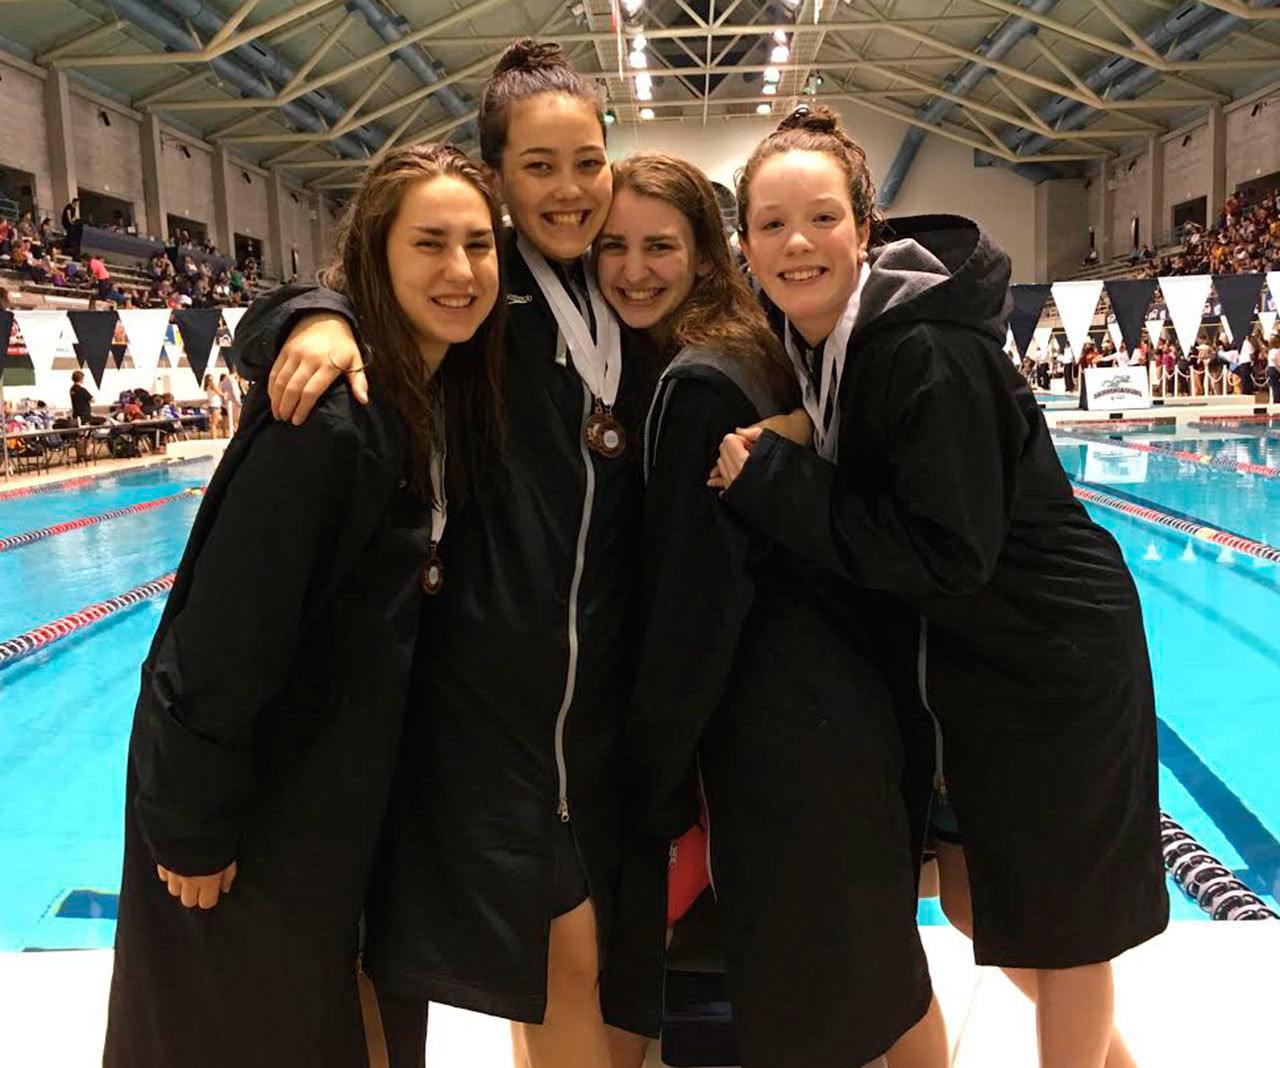 The Oak Harbor High School 200 medley relay team of Taliah Black, left, Olivia Tungate, Molly Vagt and Jillian Pape finished sixth in the state meet Saturday. (Submitted photo)